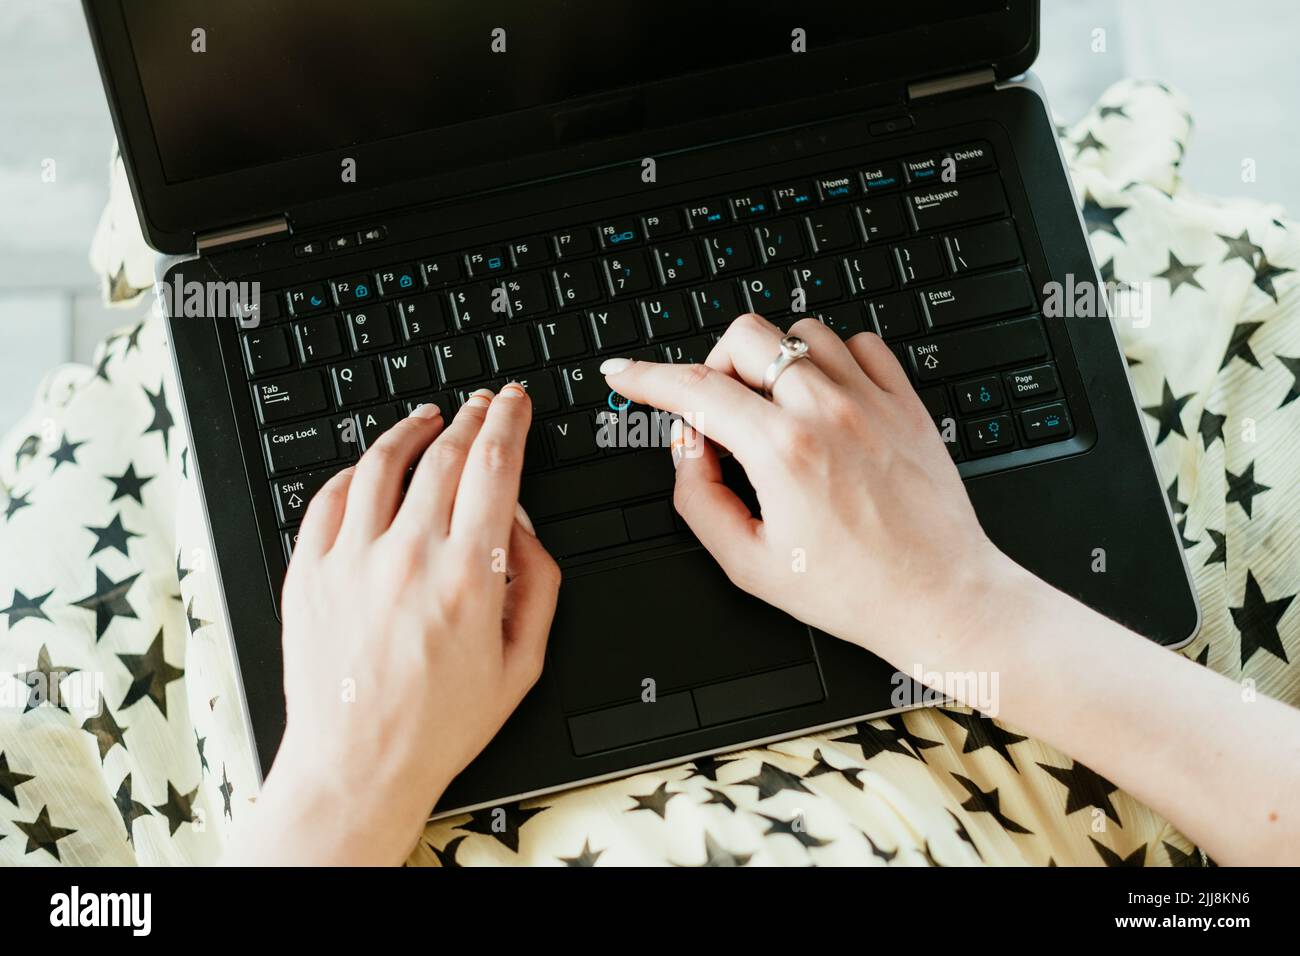 data entry freelance job remote work hands typing Stock Photo